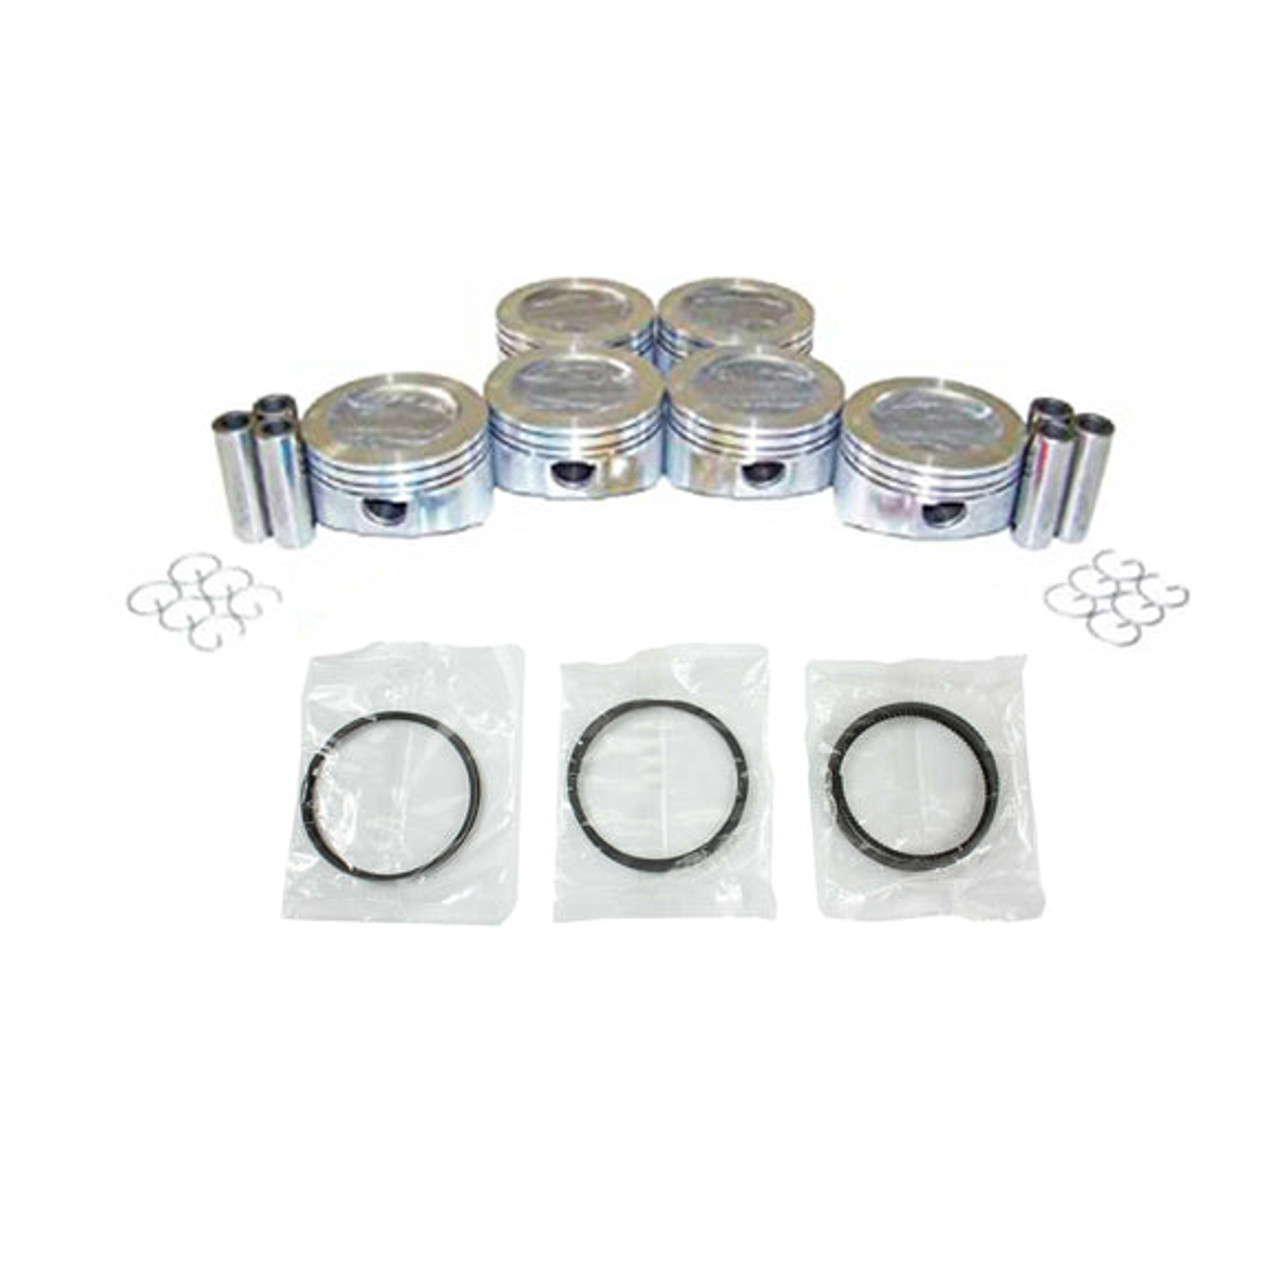 Piston Set with Rings - 1996 Buick Riviera 3.8L Engine Parts # PRK3182ZE37